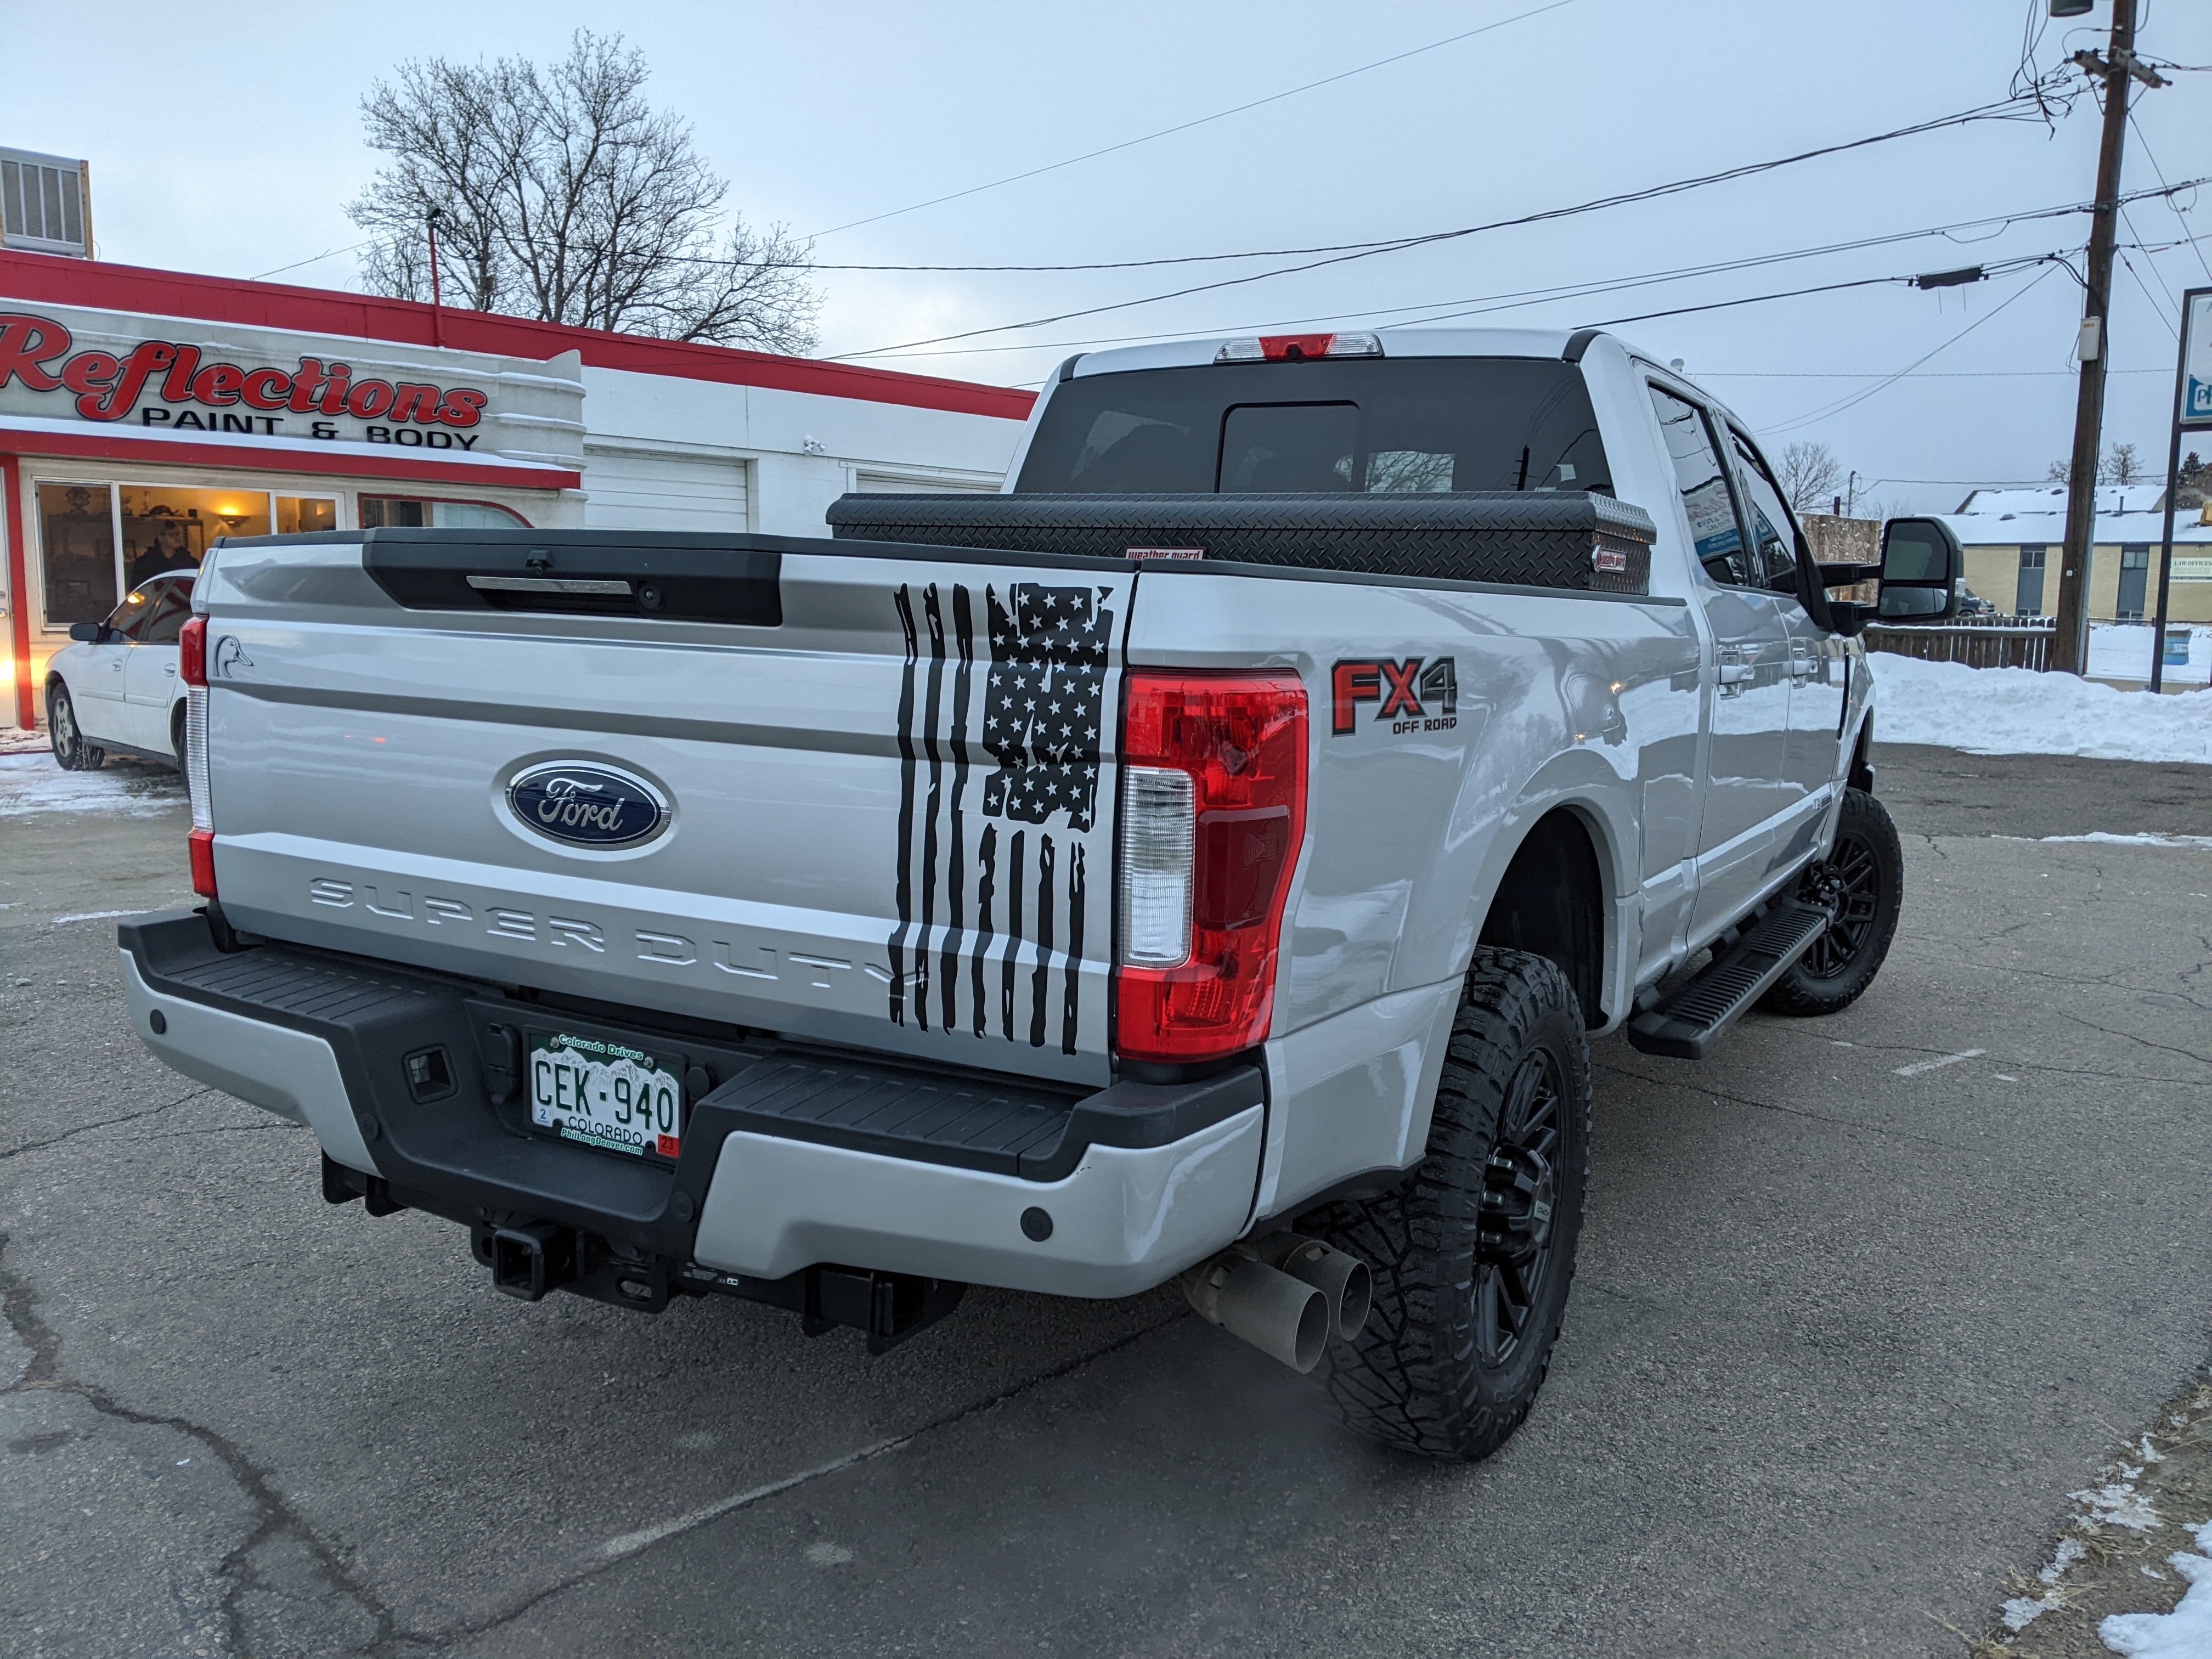 2019 Ford F-250 finished product.